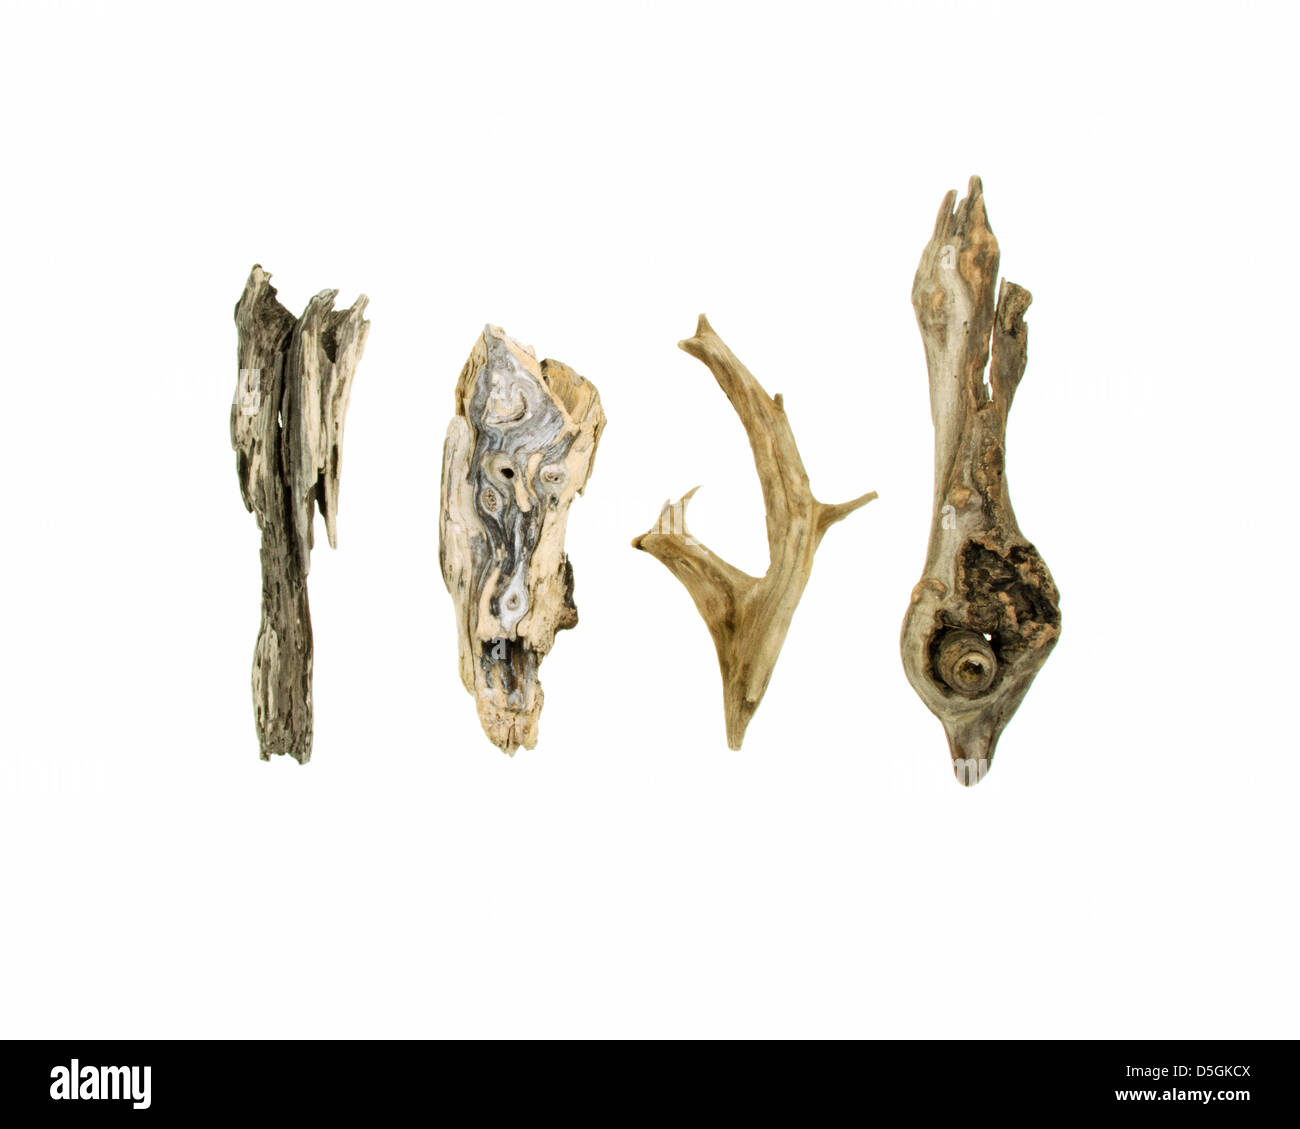 Four pieces of Maine driftwood on a white background. Stock Photo